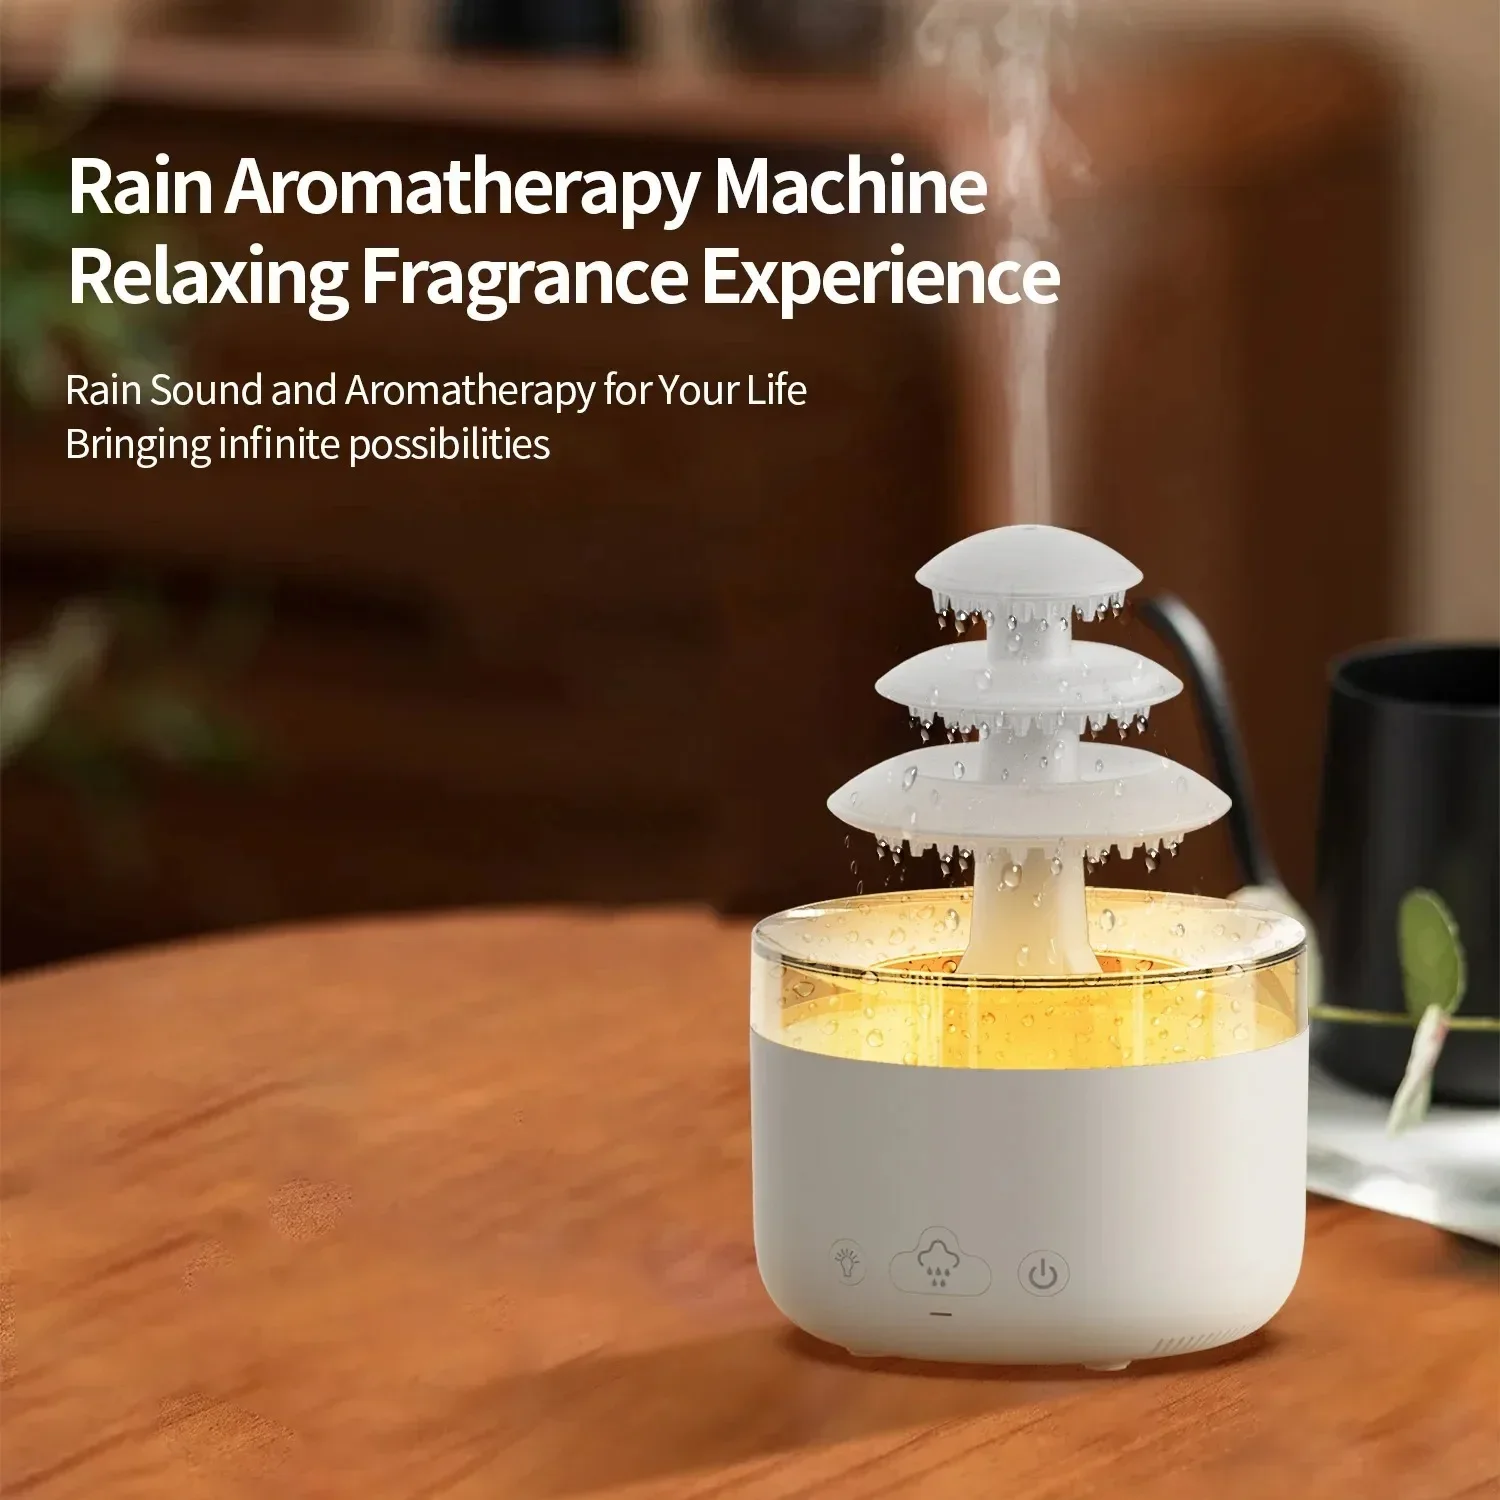 

New Mist Air Humidifier With Colorful Light 500ml Cloud Rain Air Humidifier 3 Layer Essential Oil Aromatherapy Diffuser USB Mute